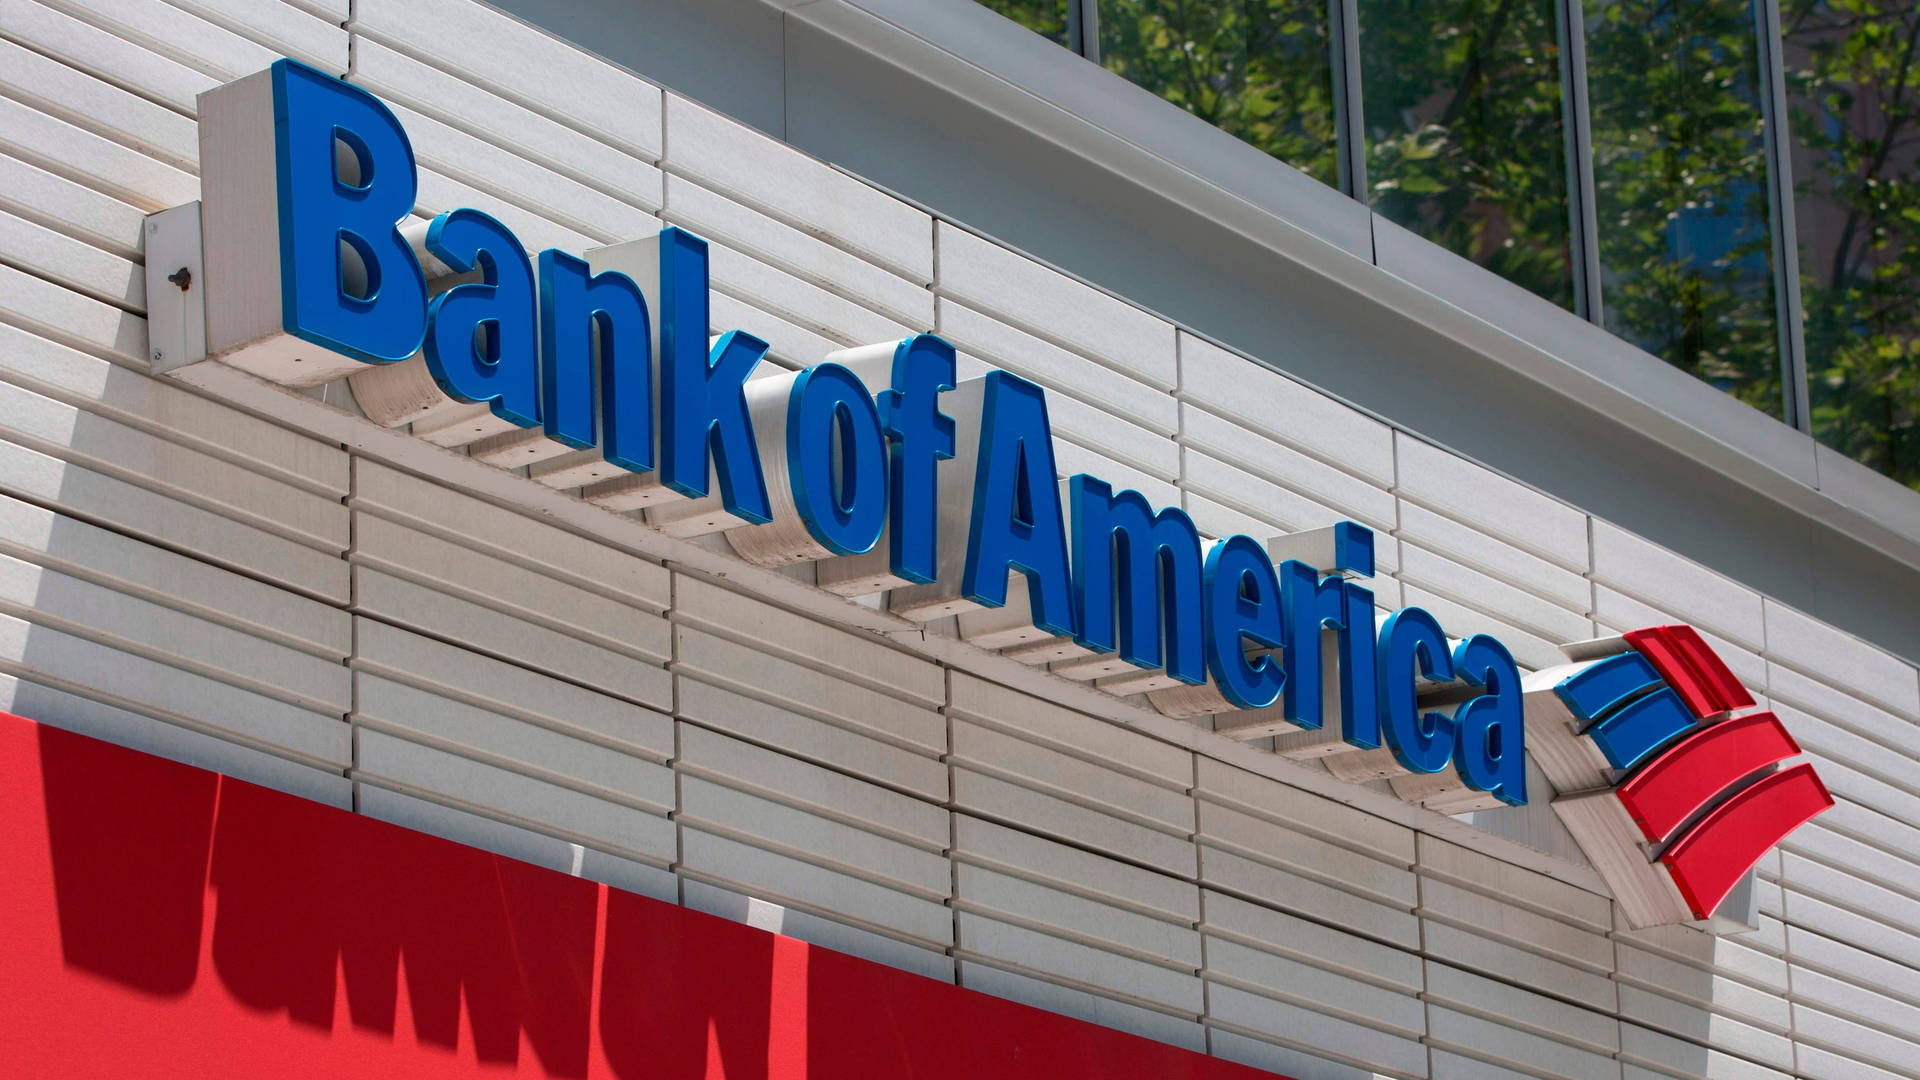 Bank Of America 3d Signage Background